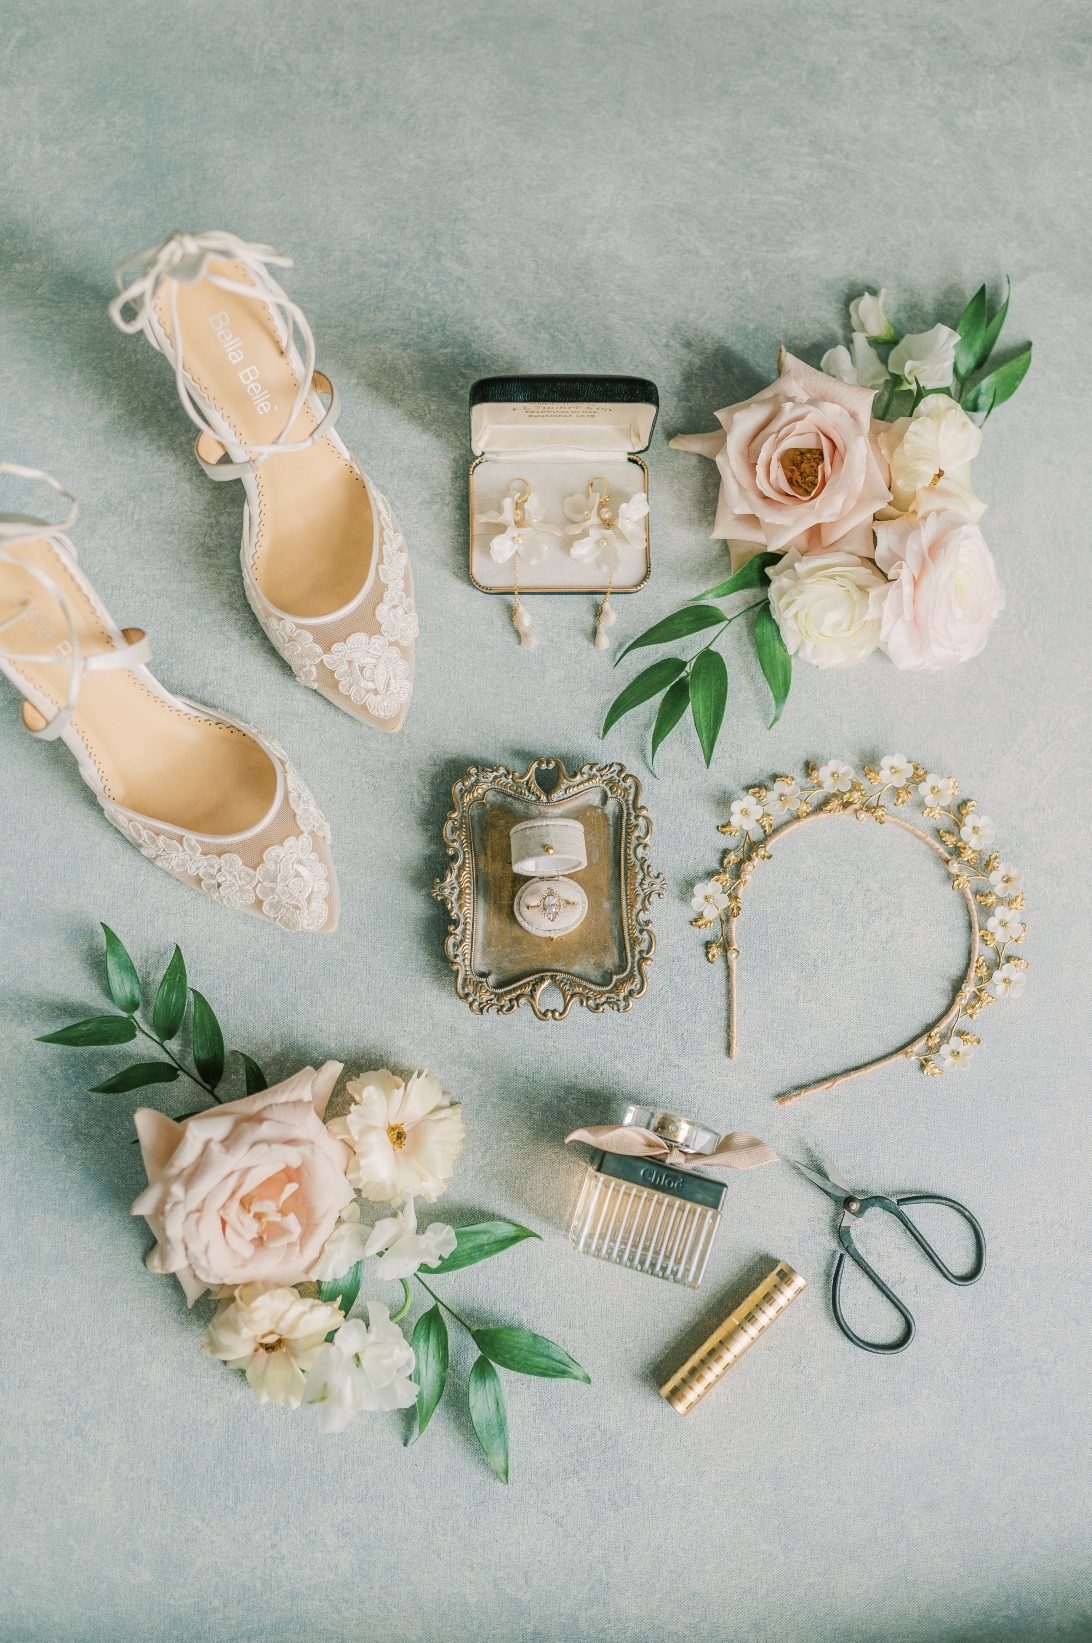 A flat lay shot of bridal accessories - Bella Belle shoes, wedding ring, perfume, headband, earings and flowers